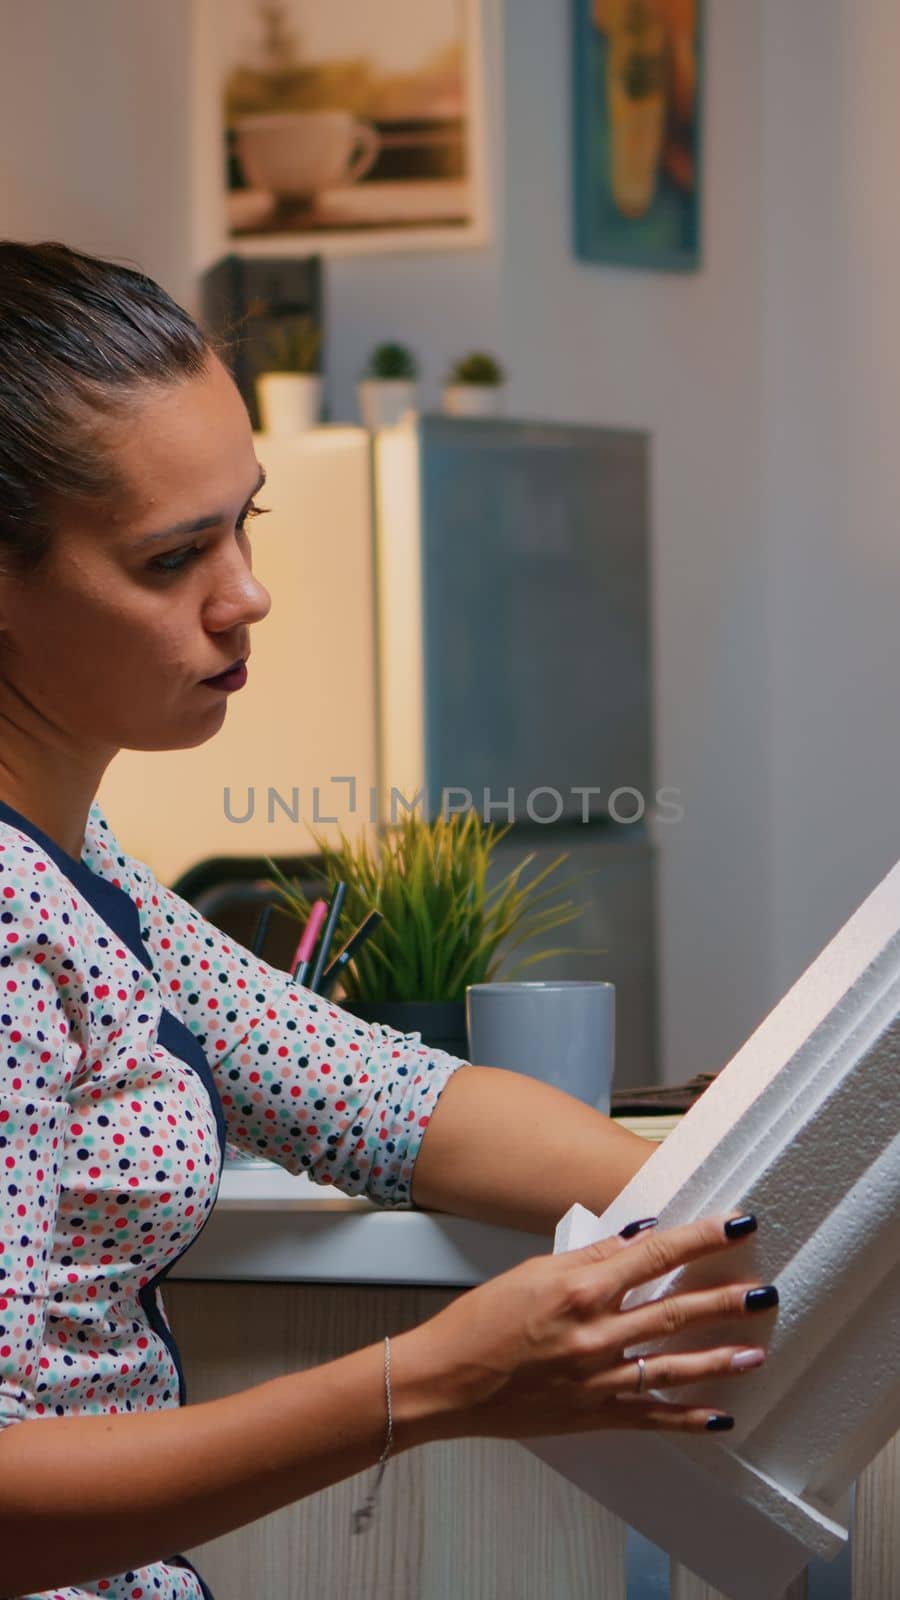 Freelancer architect working in 3D software to elaborate buildings design sitting at kitchen desk at night. Engineer artist creating and studying in office holding scale model, determination, career.